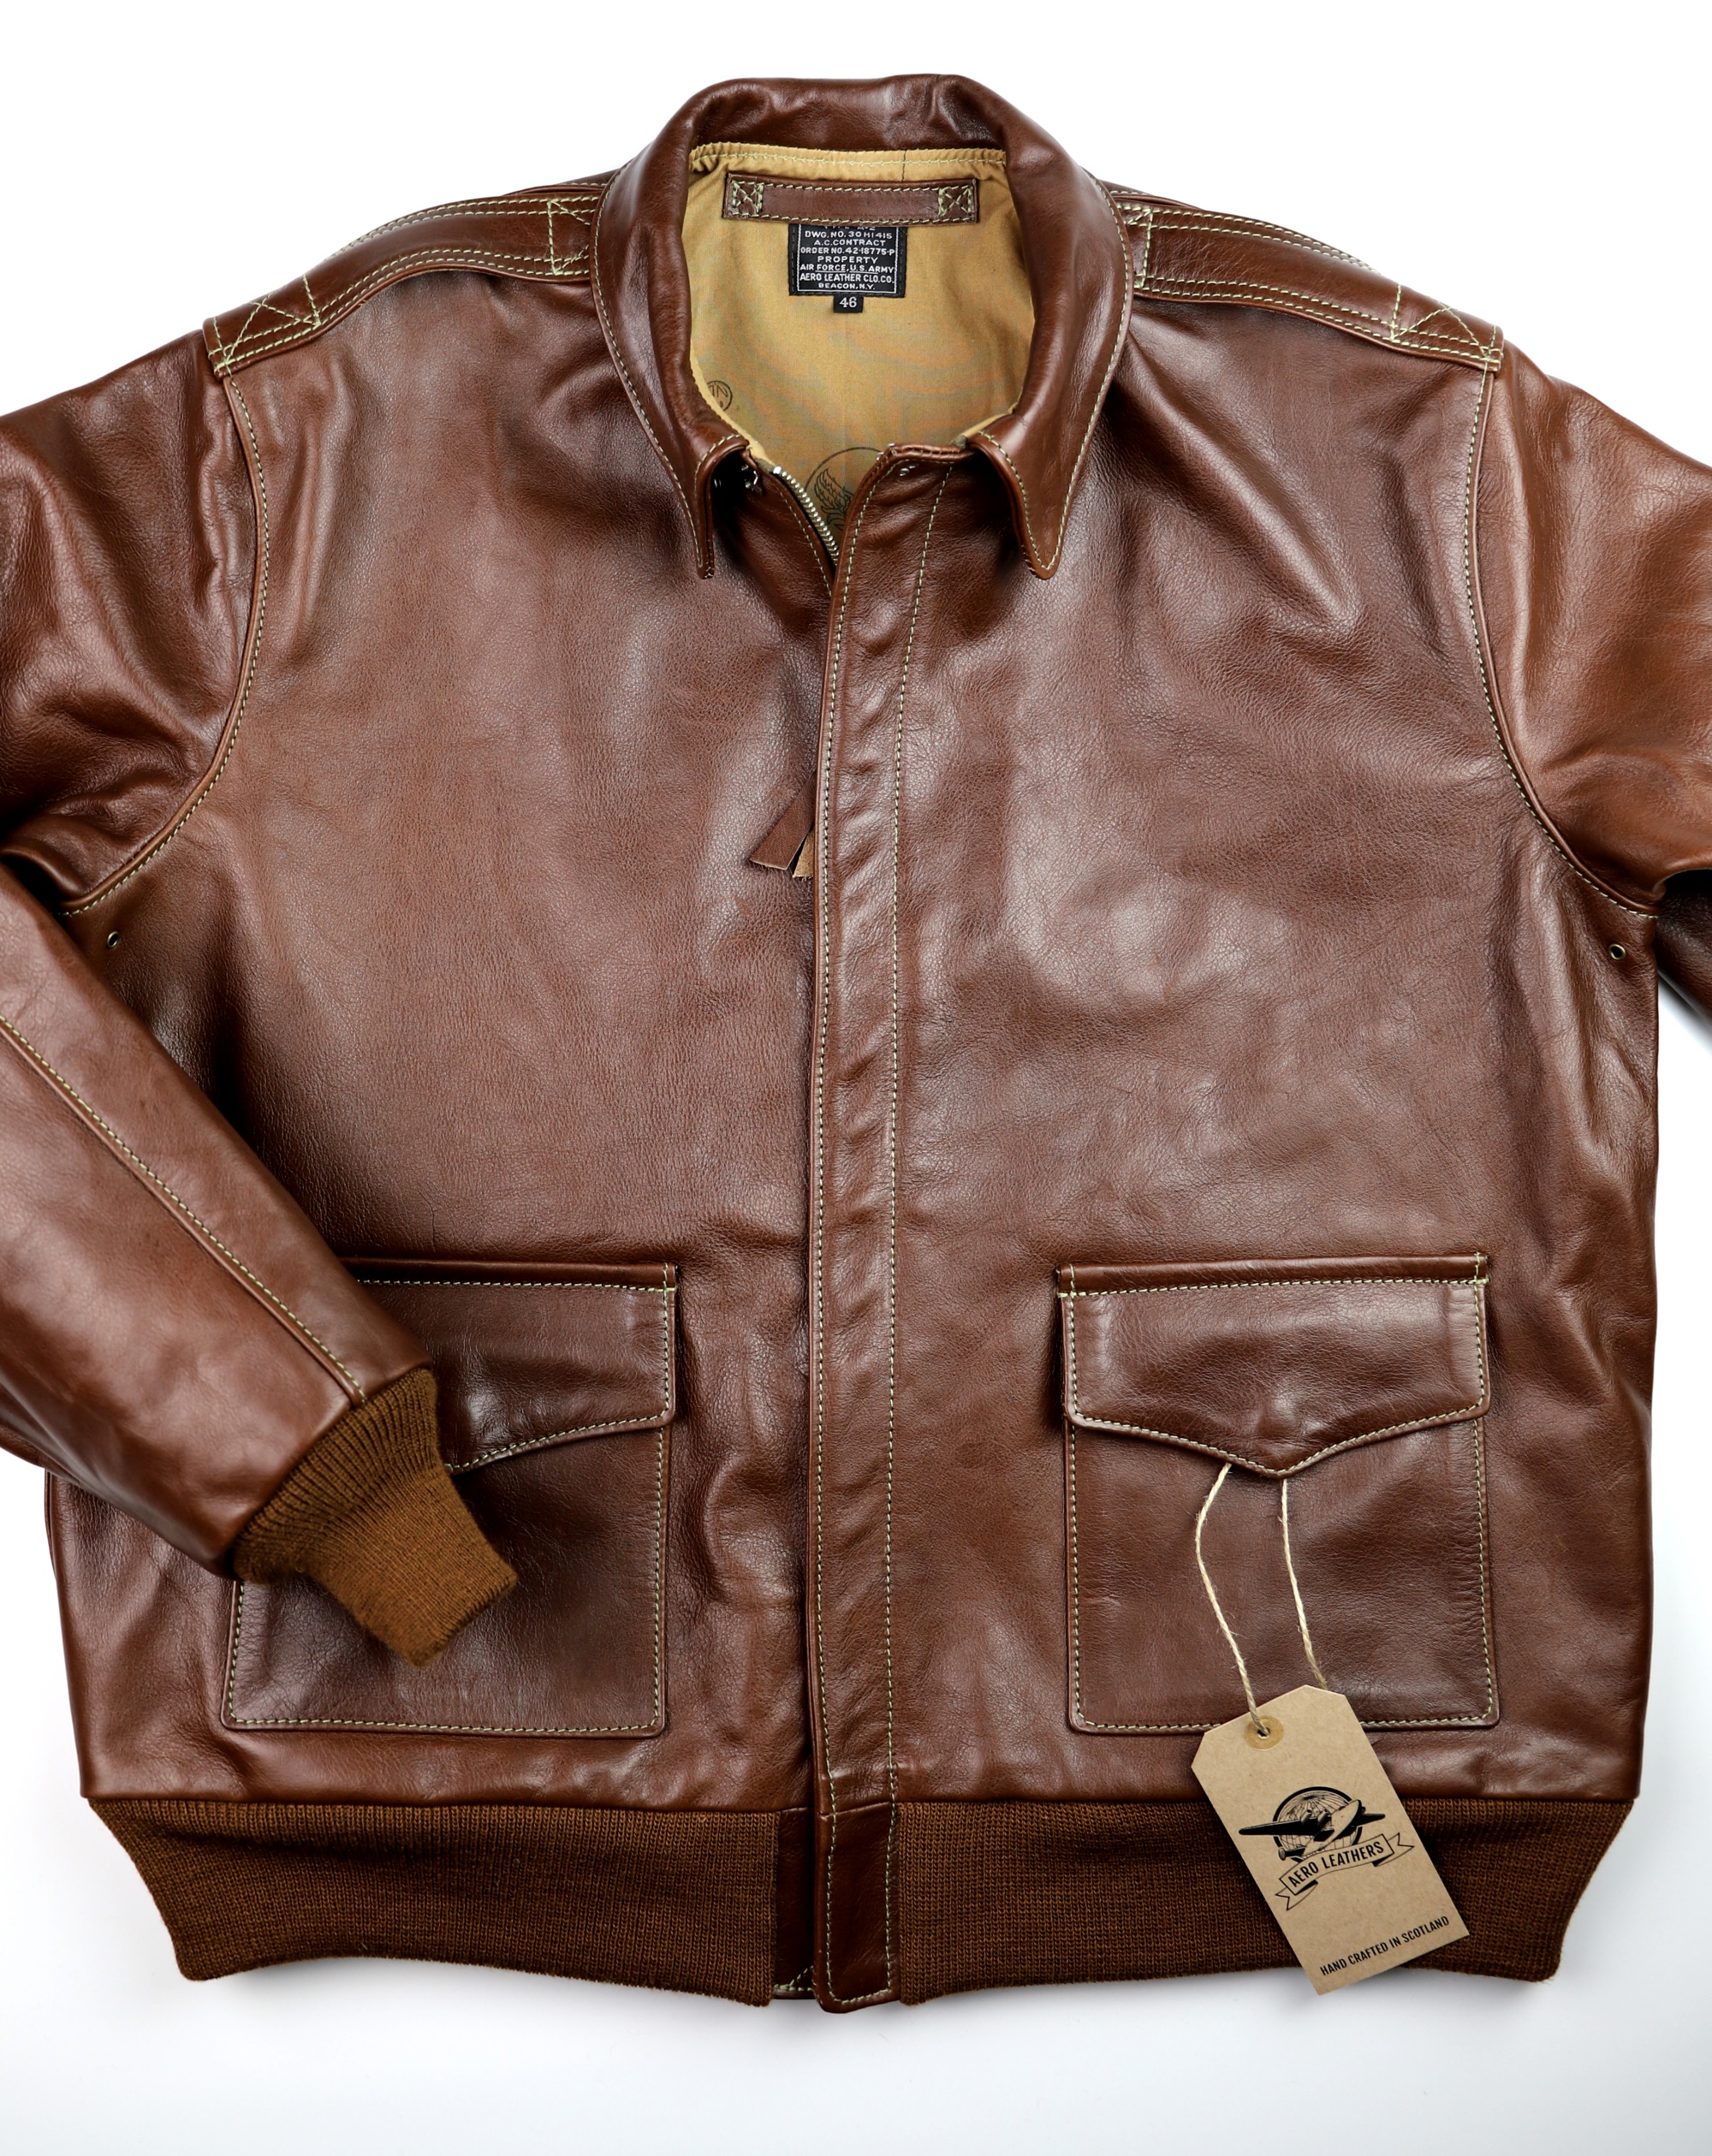 Aero A-2 18775 Russet Vicenza Horsehide SG3 front.jpg